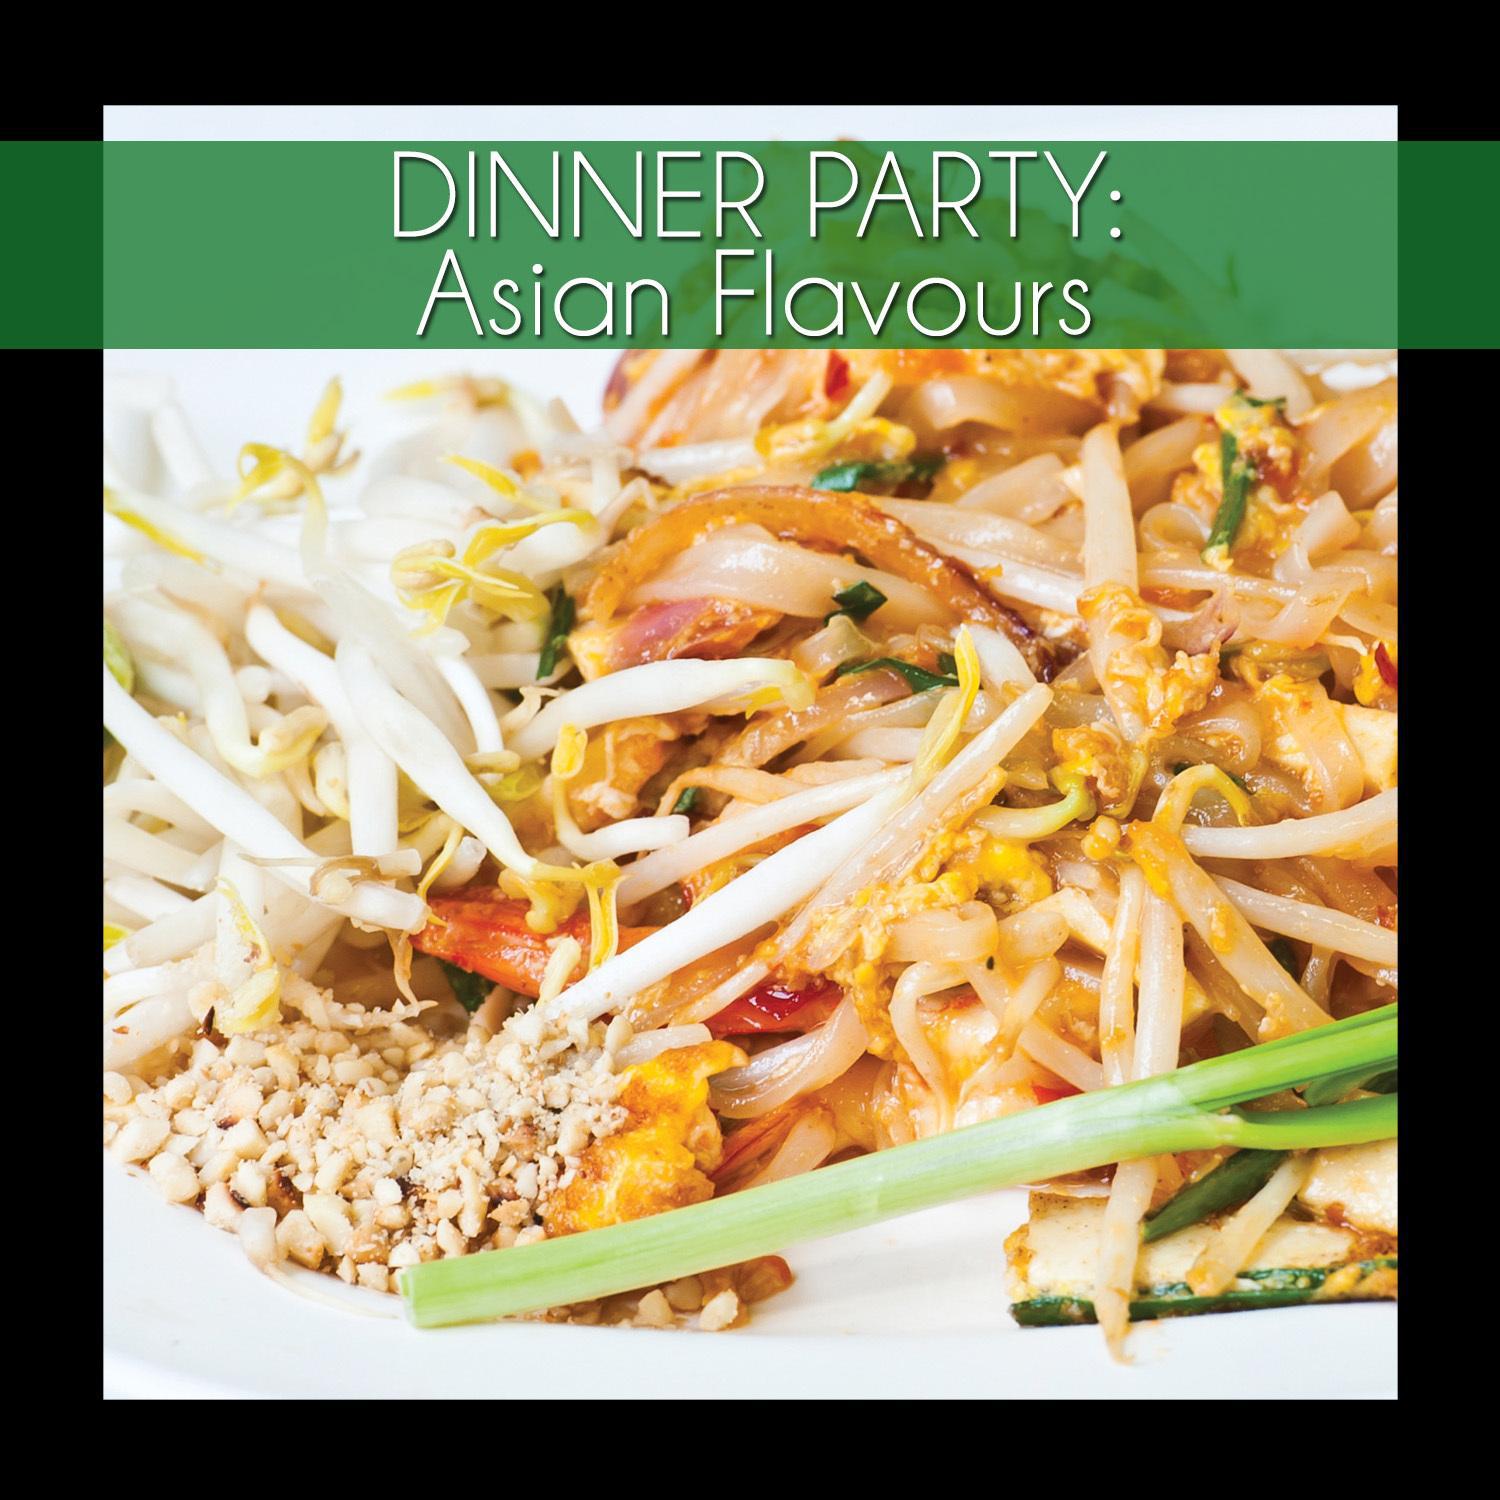 Dinner Party: Asian Flavours